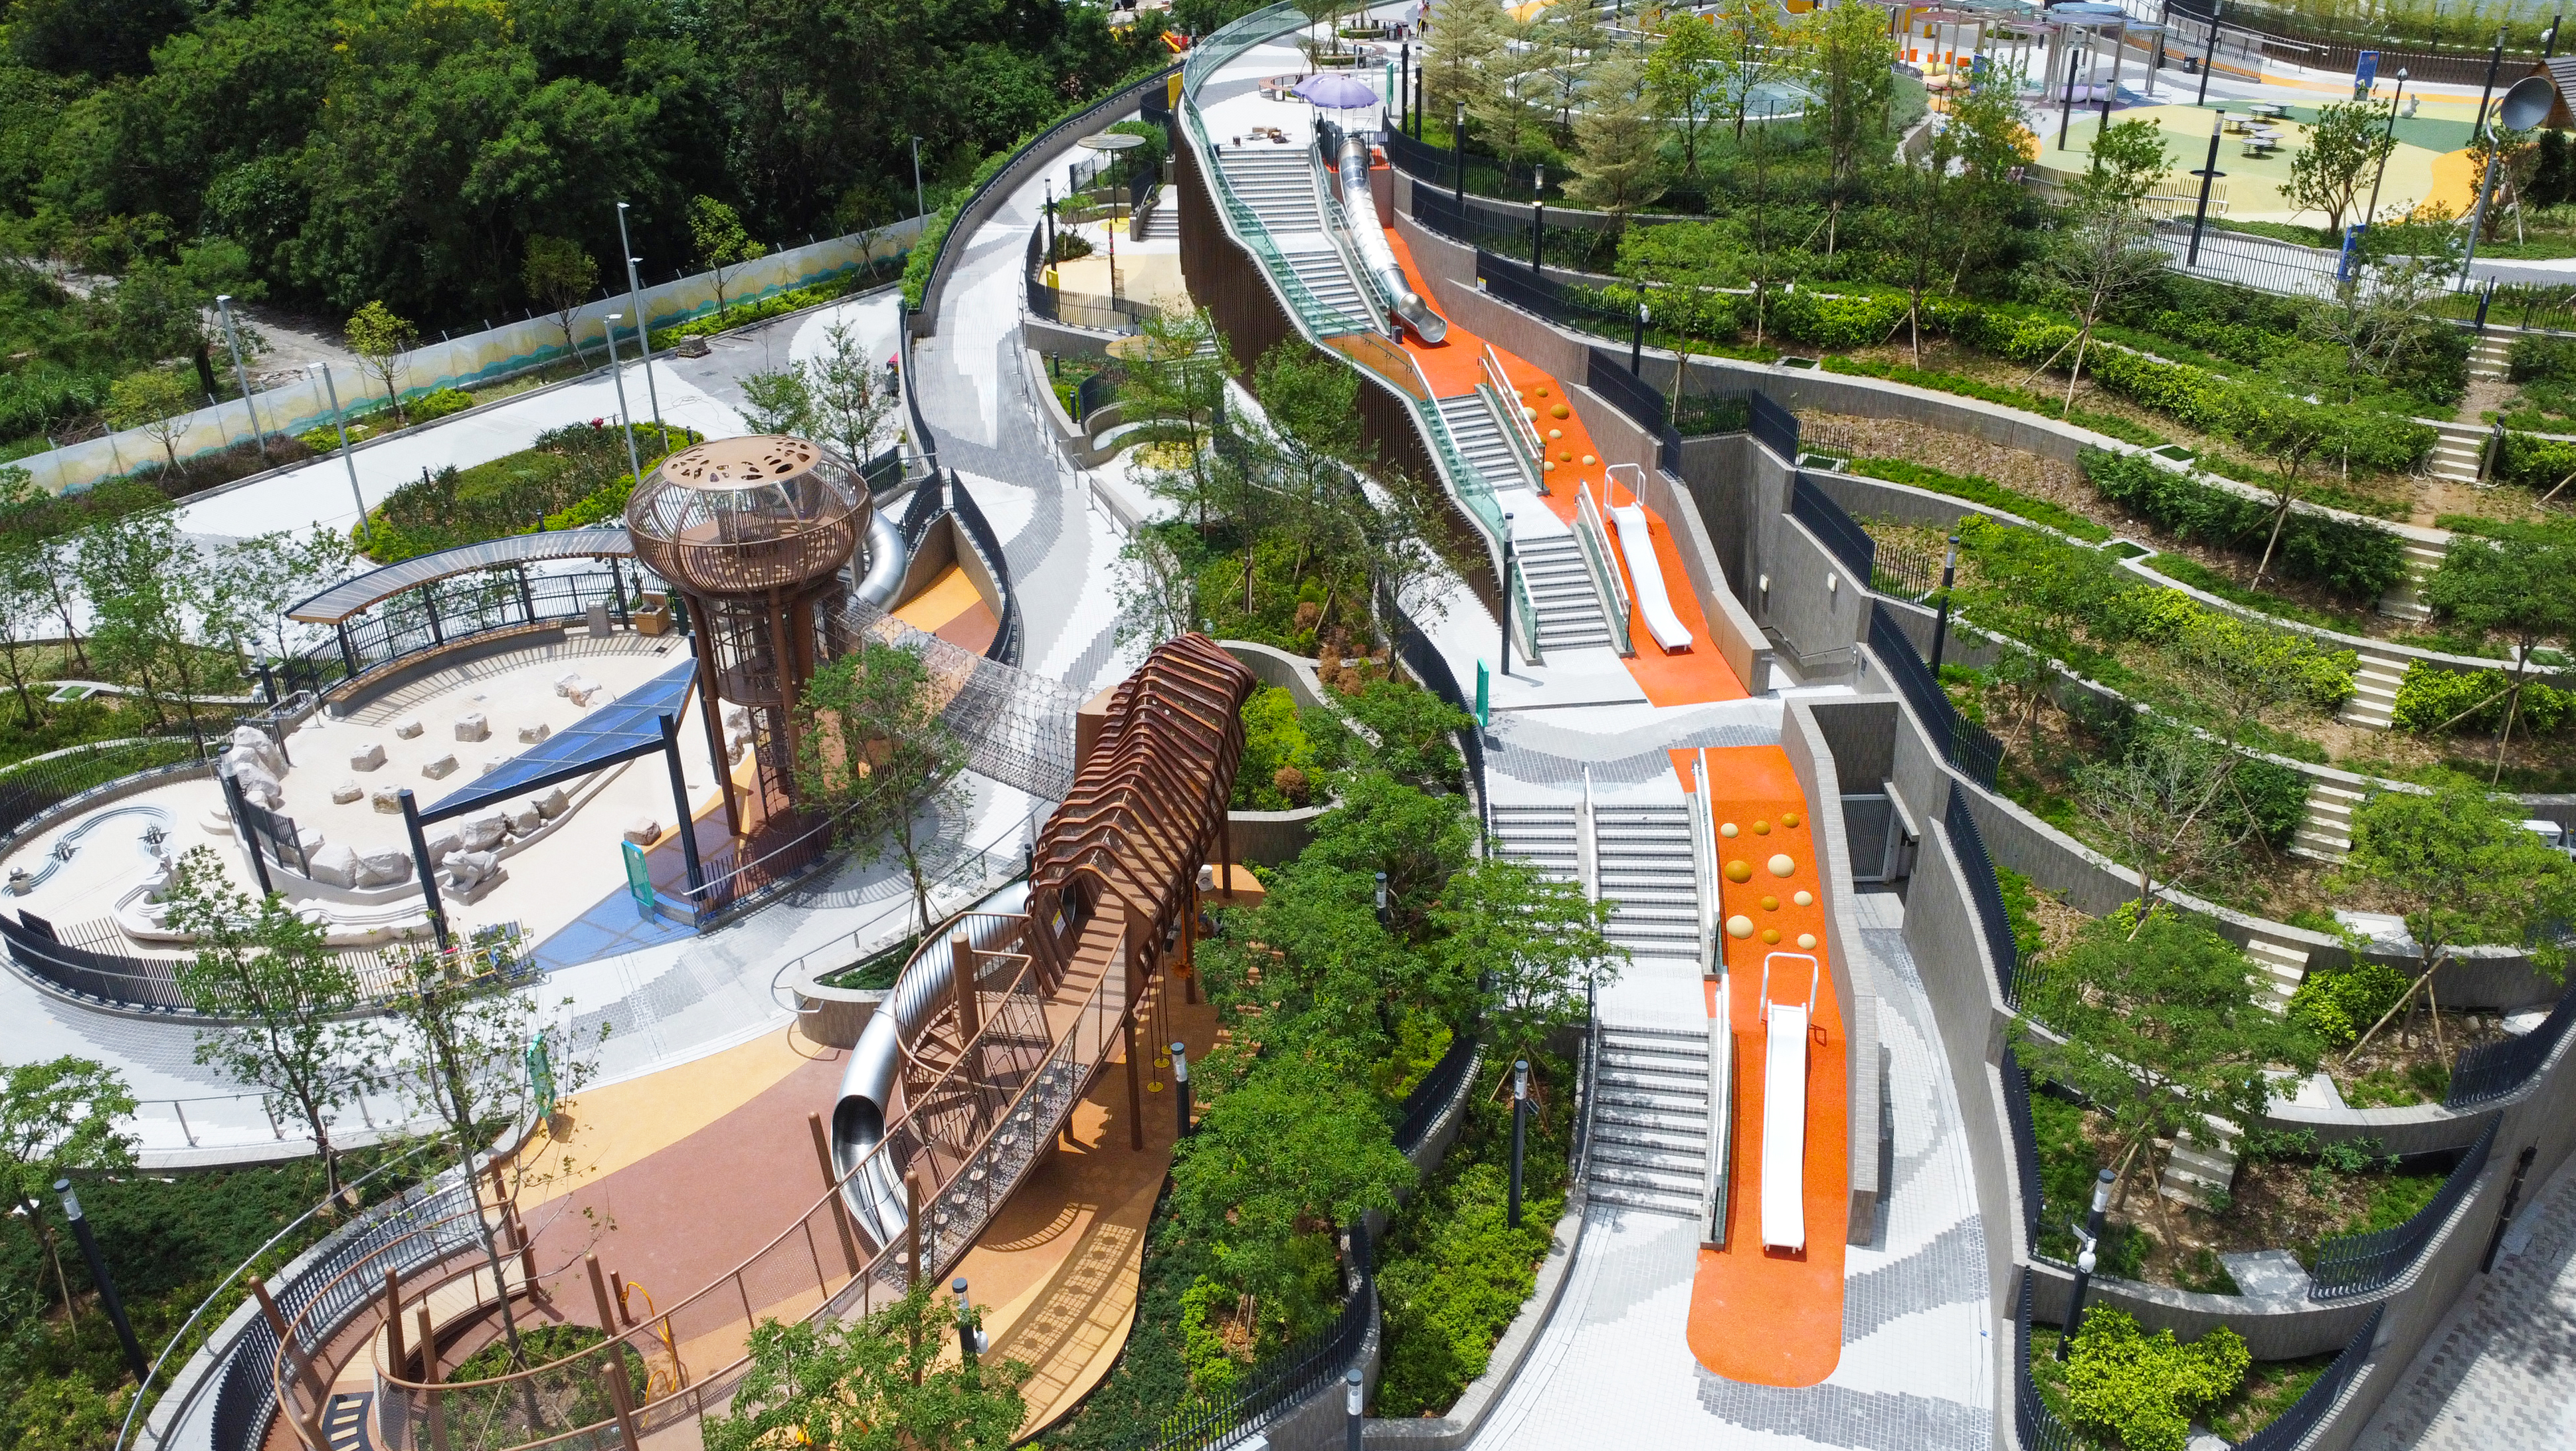  The Cha Kwo Ling Promenade and Tsui Ping Seaside officially opened today (August 24). Photo shows children’s play facilities on the landscaped deck on the promenade.